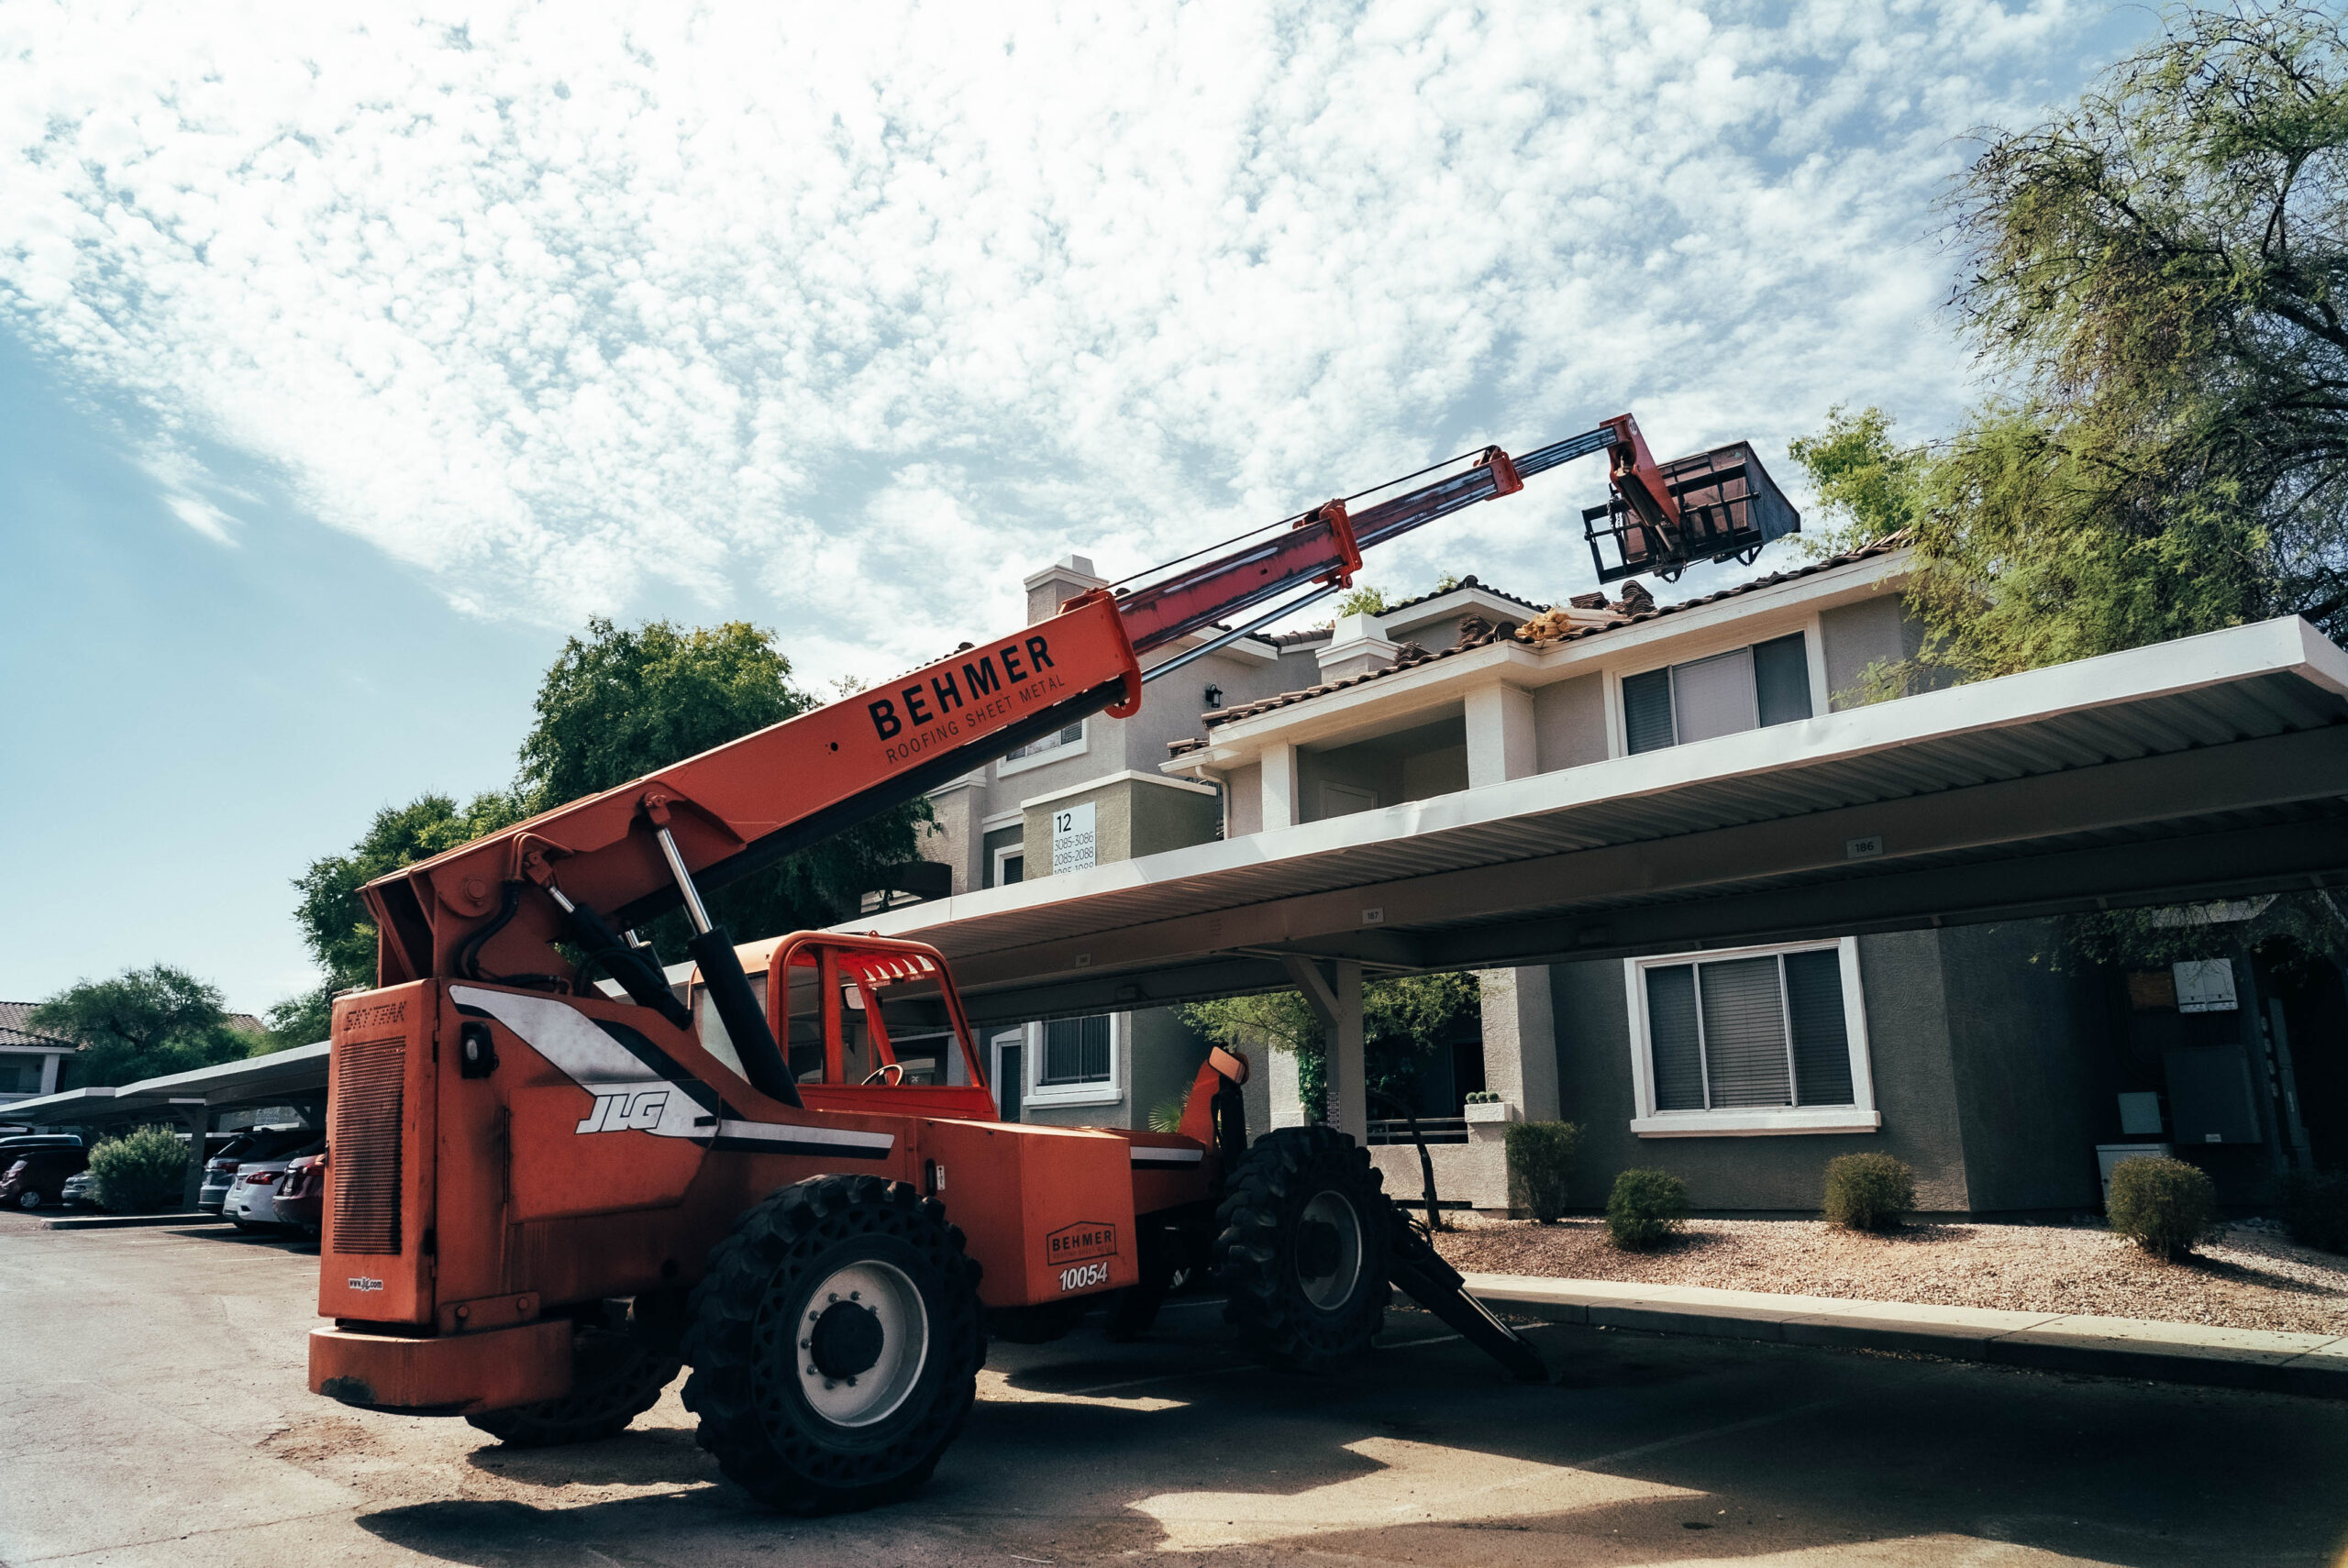 Job site in Gilbert featuring an orange crane for tile roof installation.